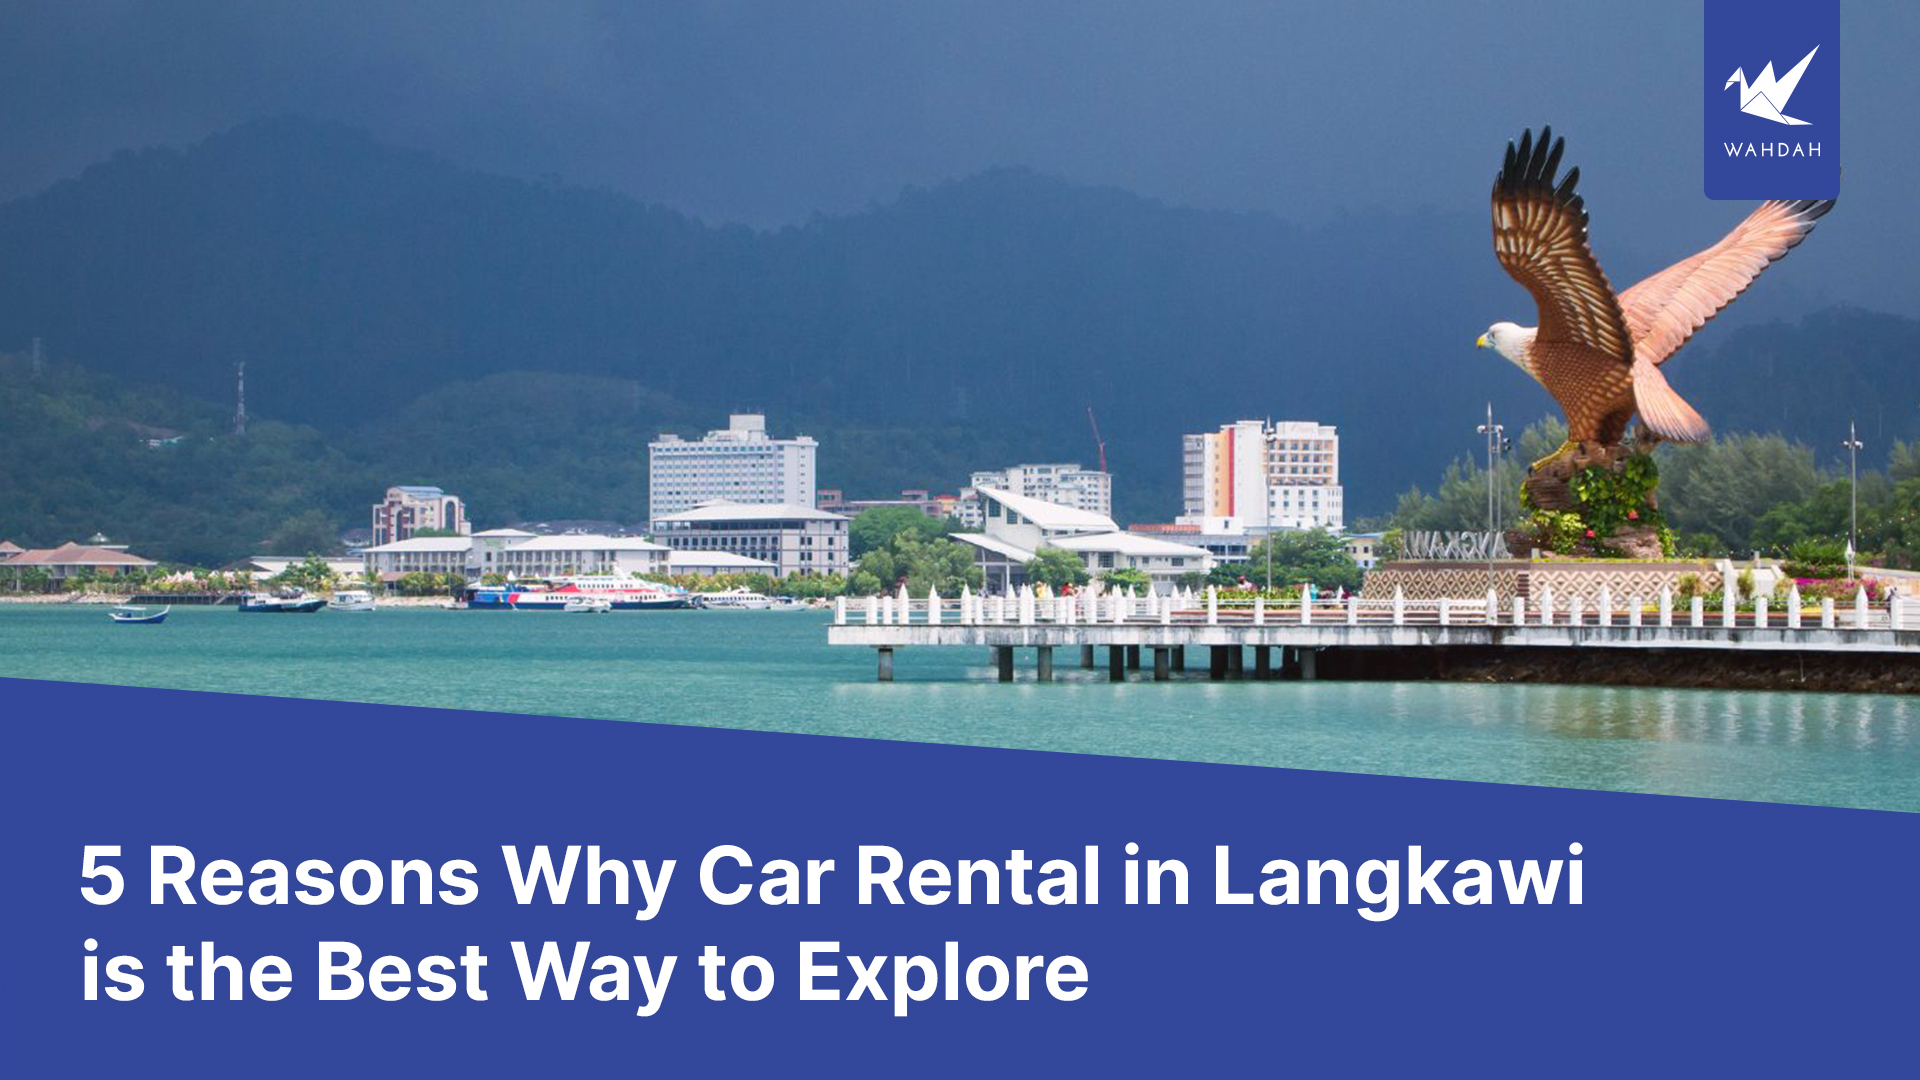 5 Reasons Why Car Rental in Langkawi is the Best Way to Explore